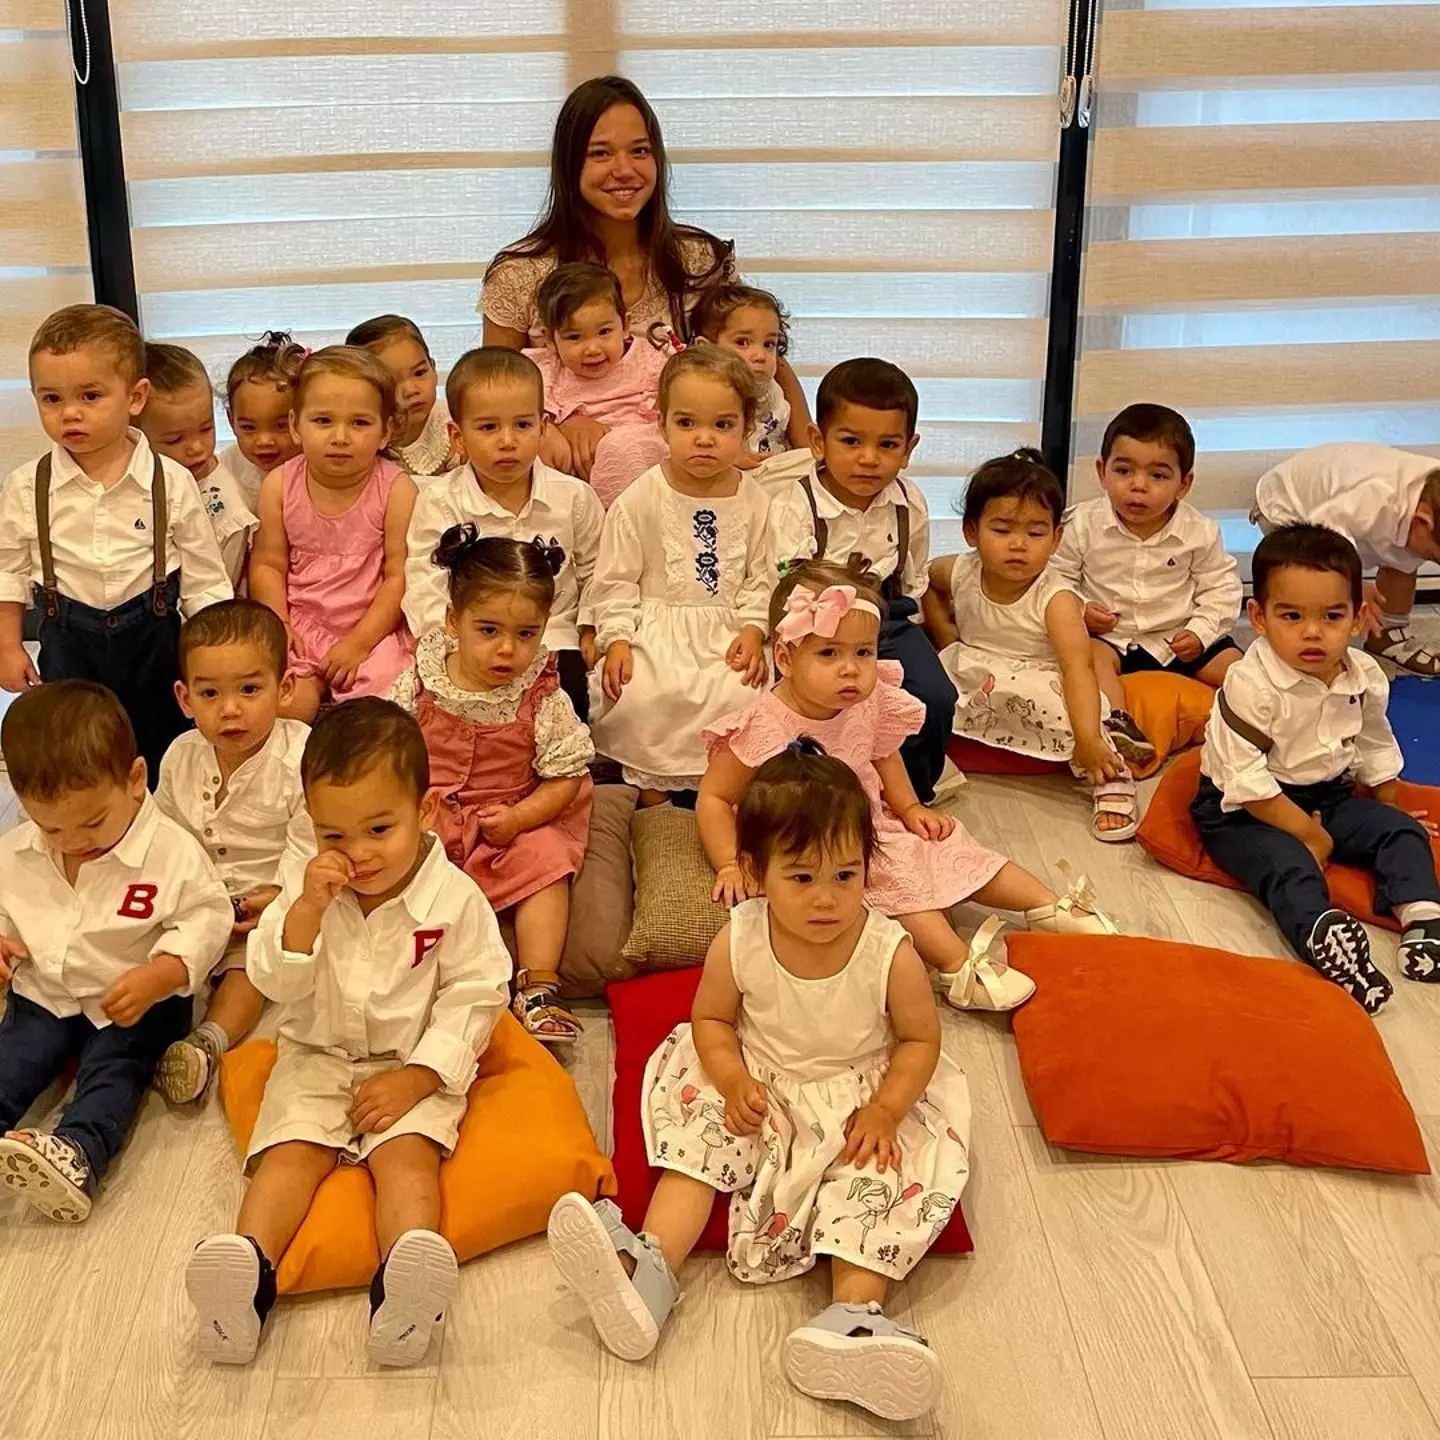 Kristina has a whopping 22 children.